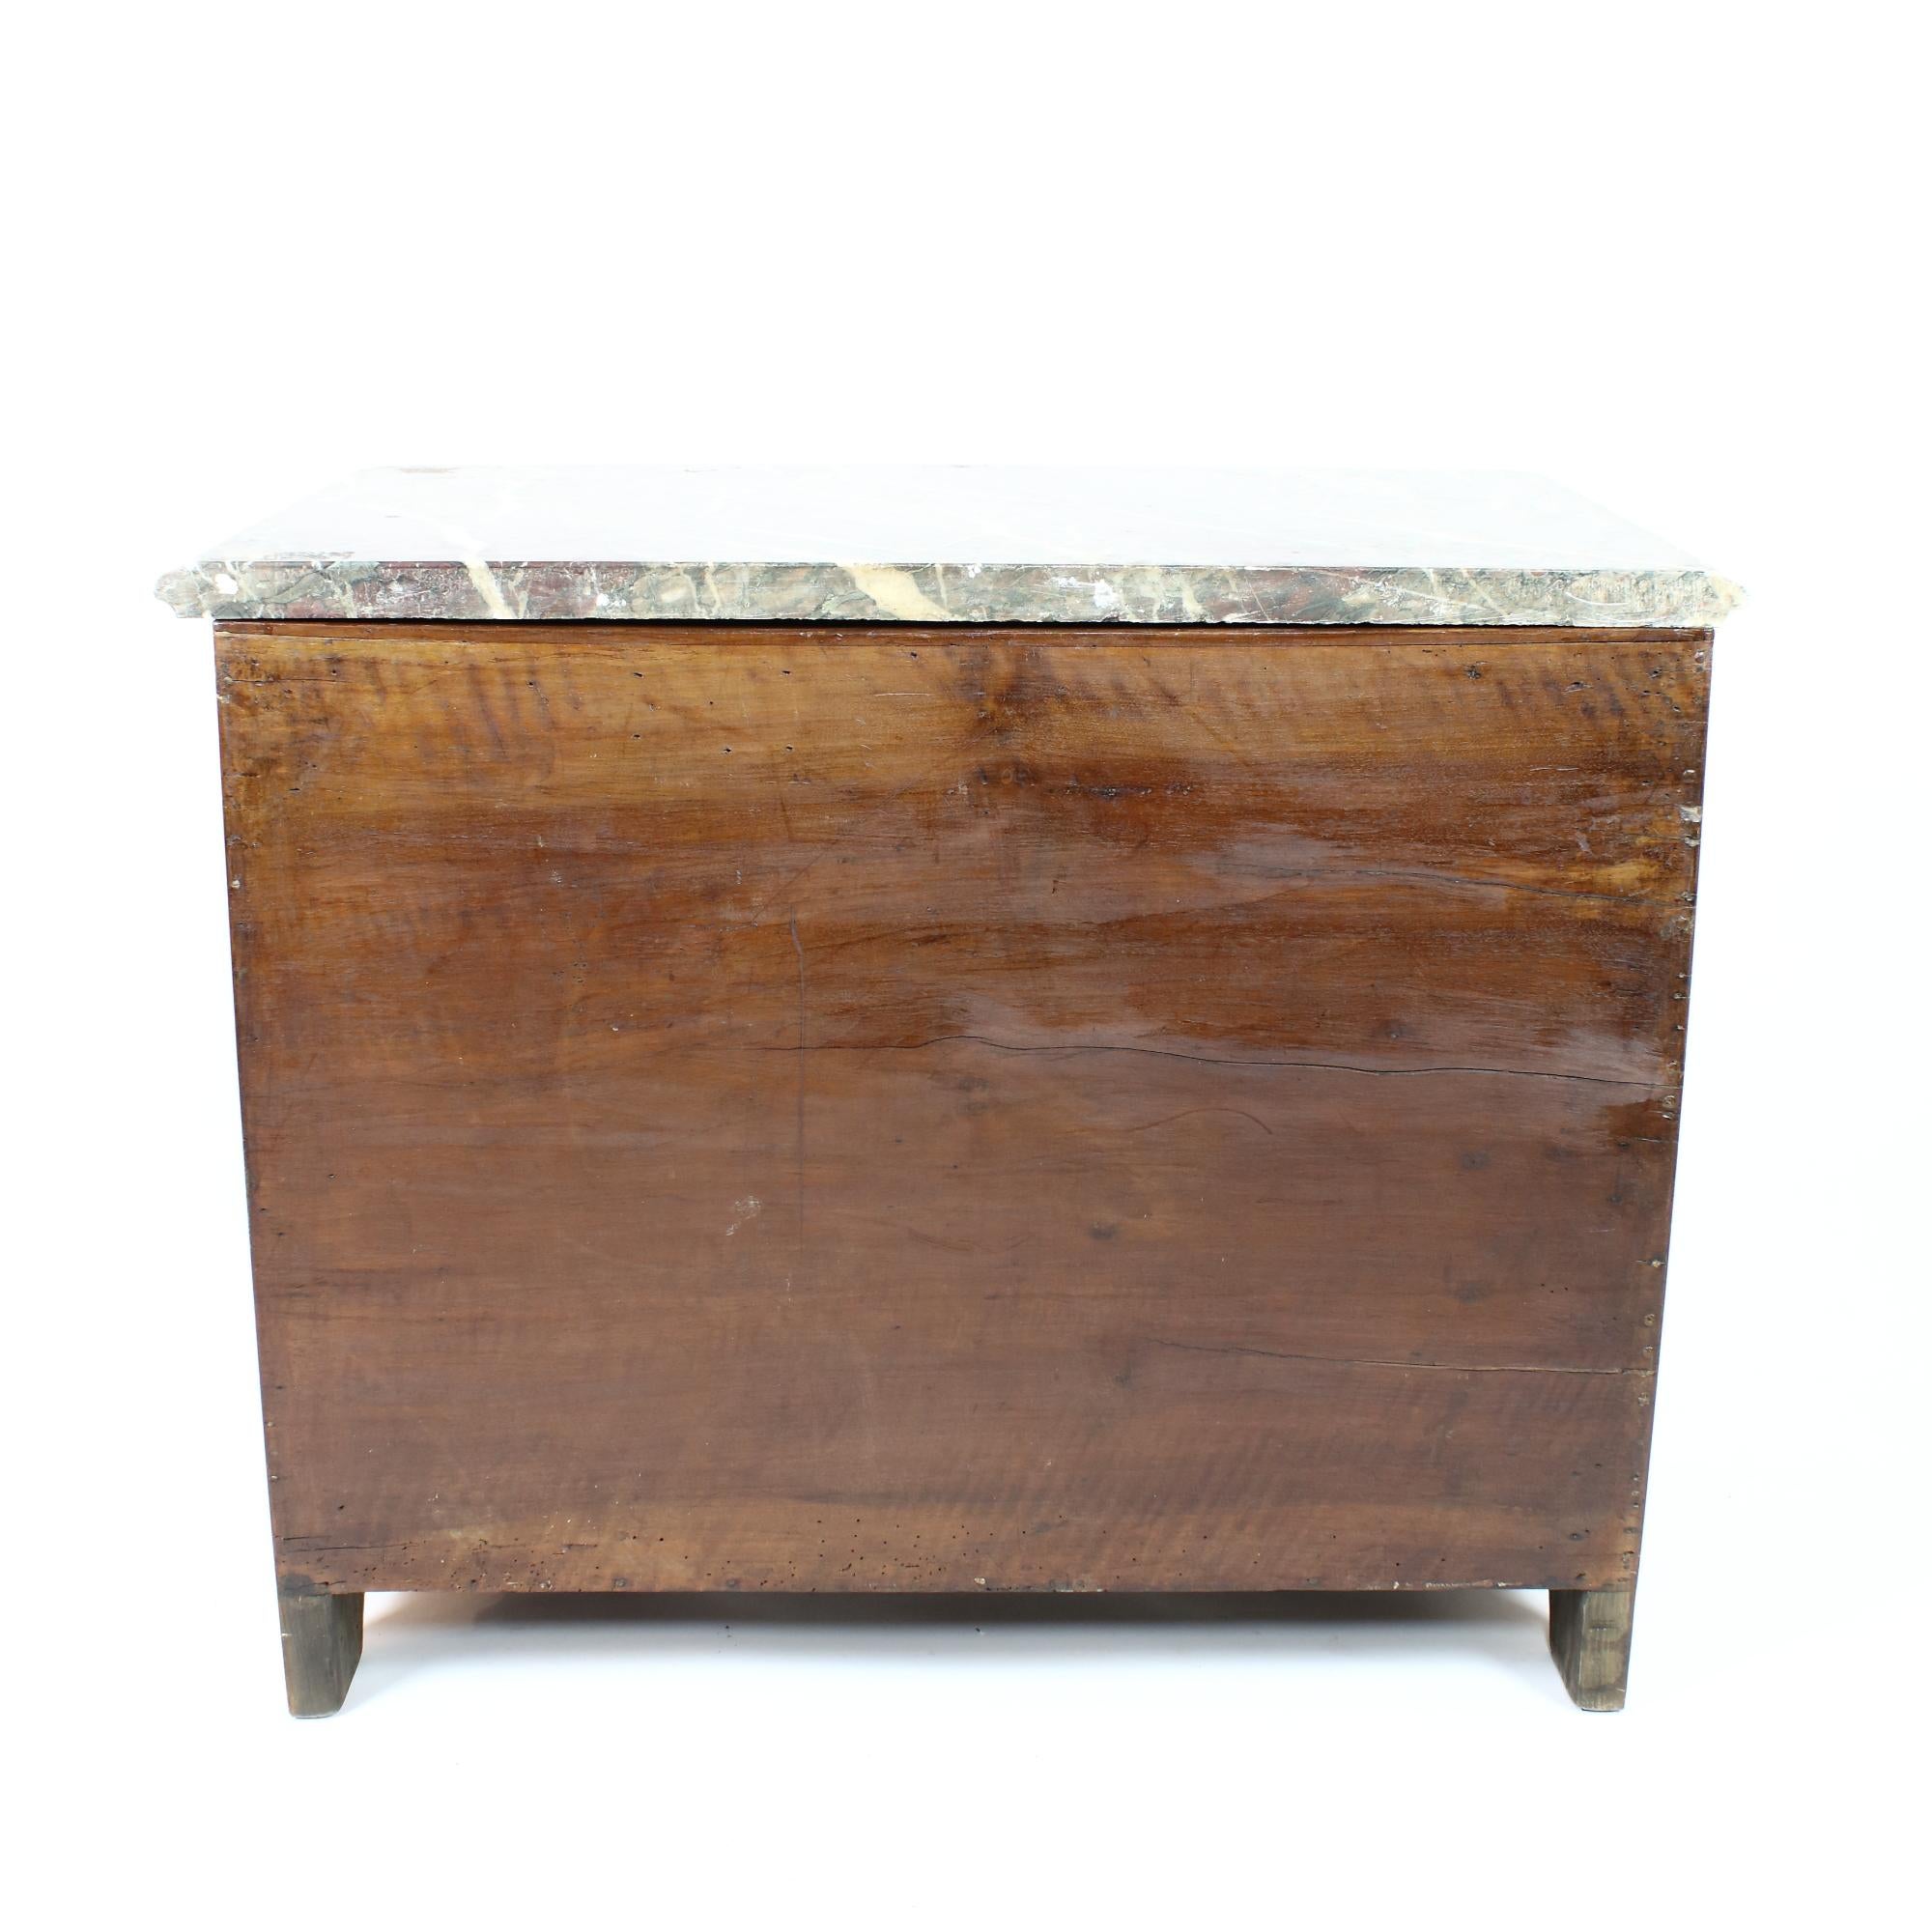 Early 18th Century French Louis XIV/Régence Period Trellis Marquetry Commode For Sale 3